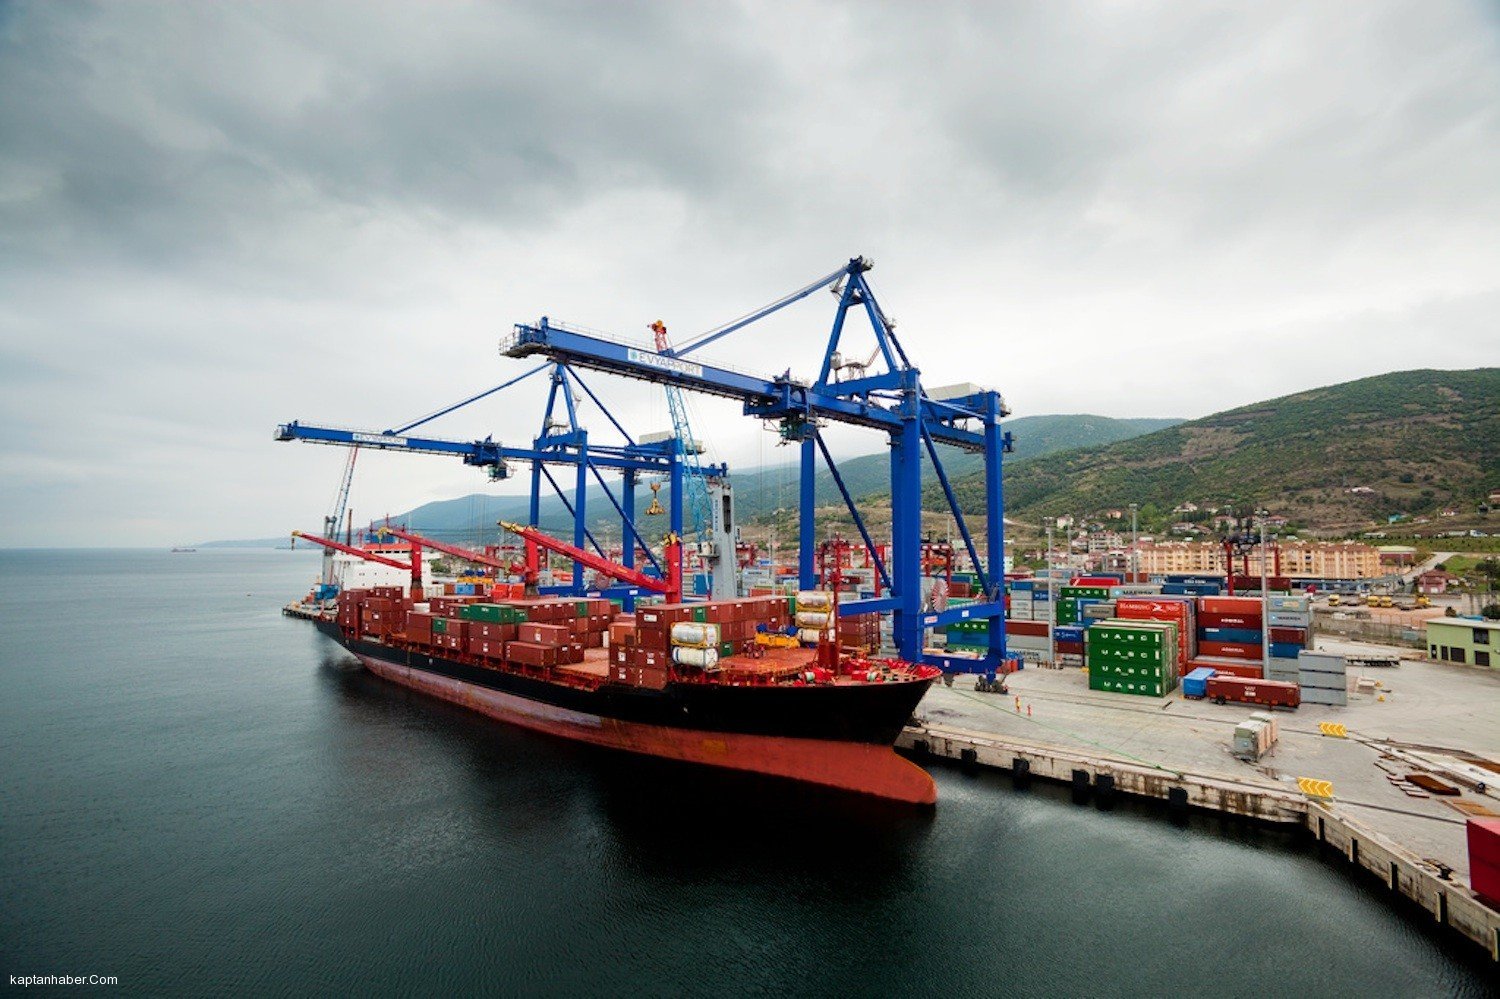 Volume of cargo accepted by Türkiye's Istanbul port this year revealed - Trend News Agency